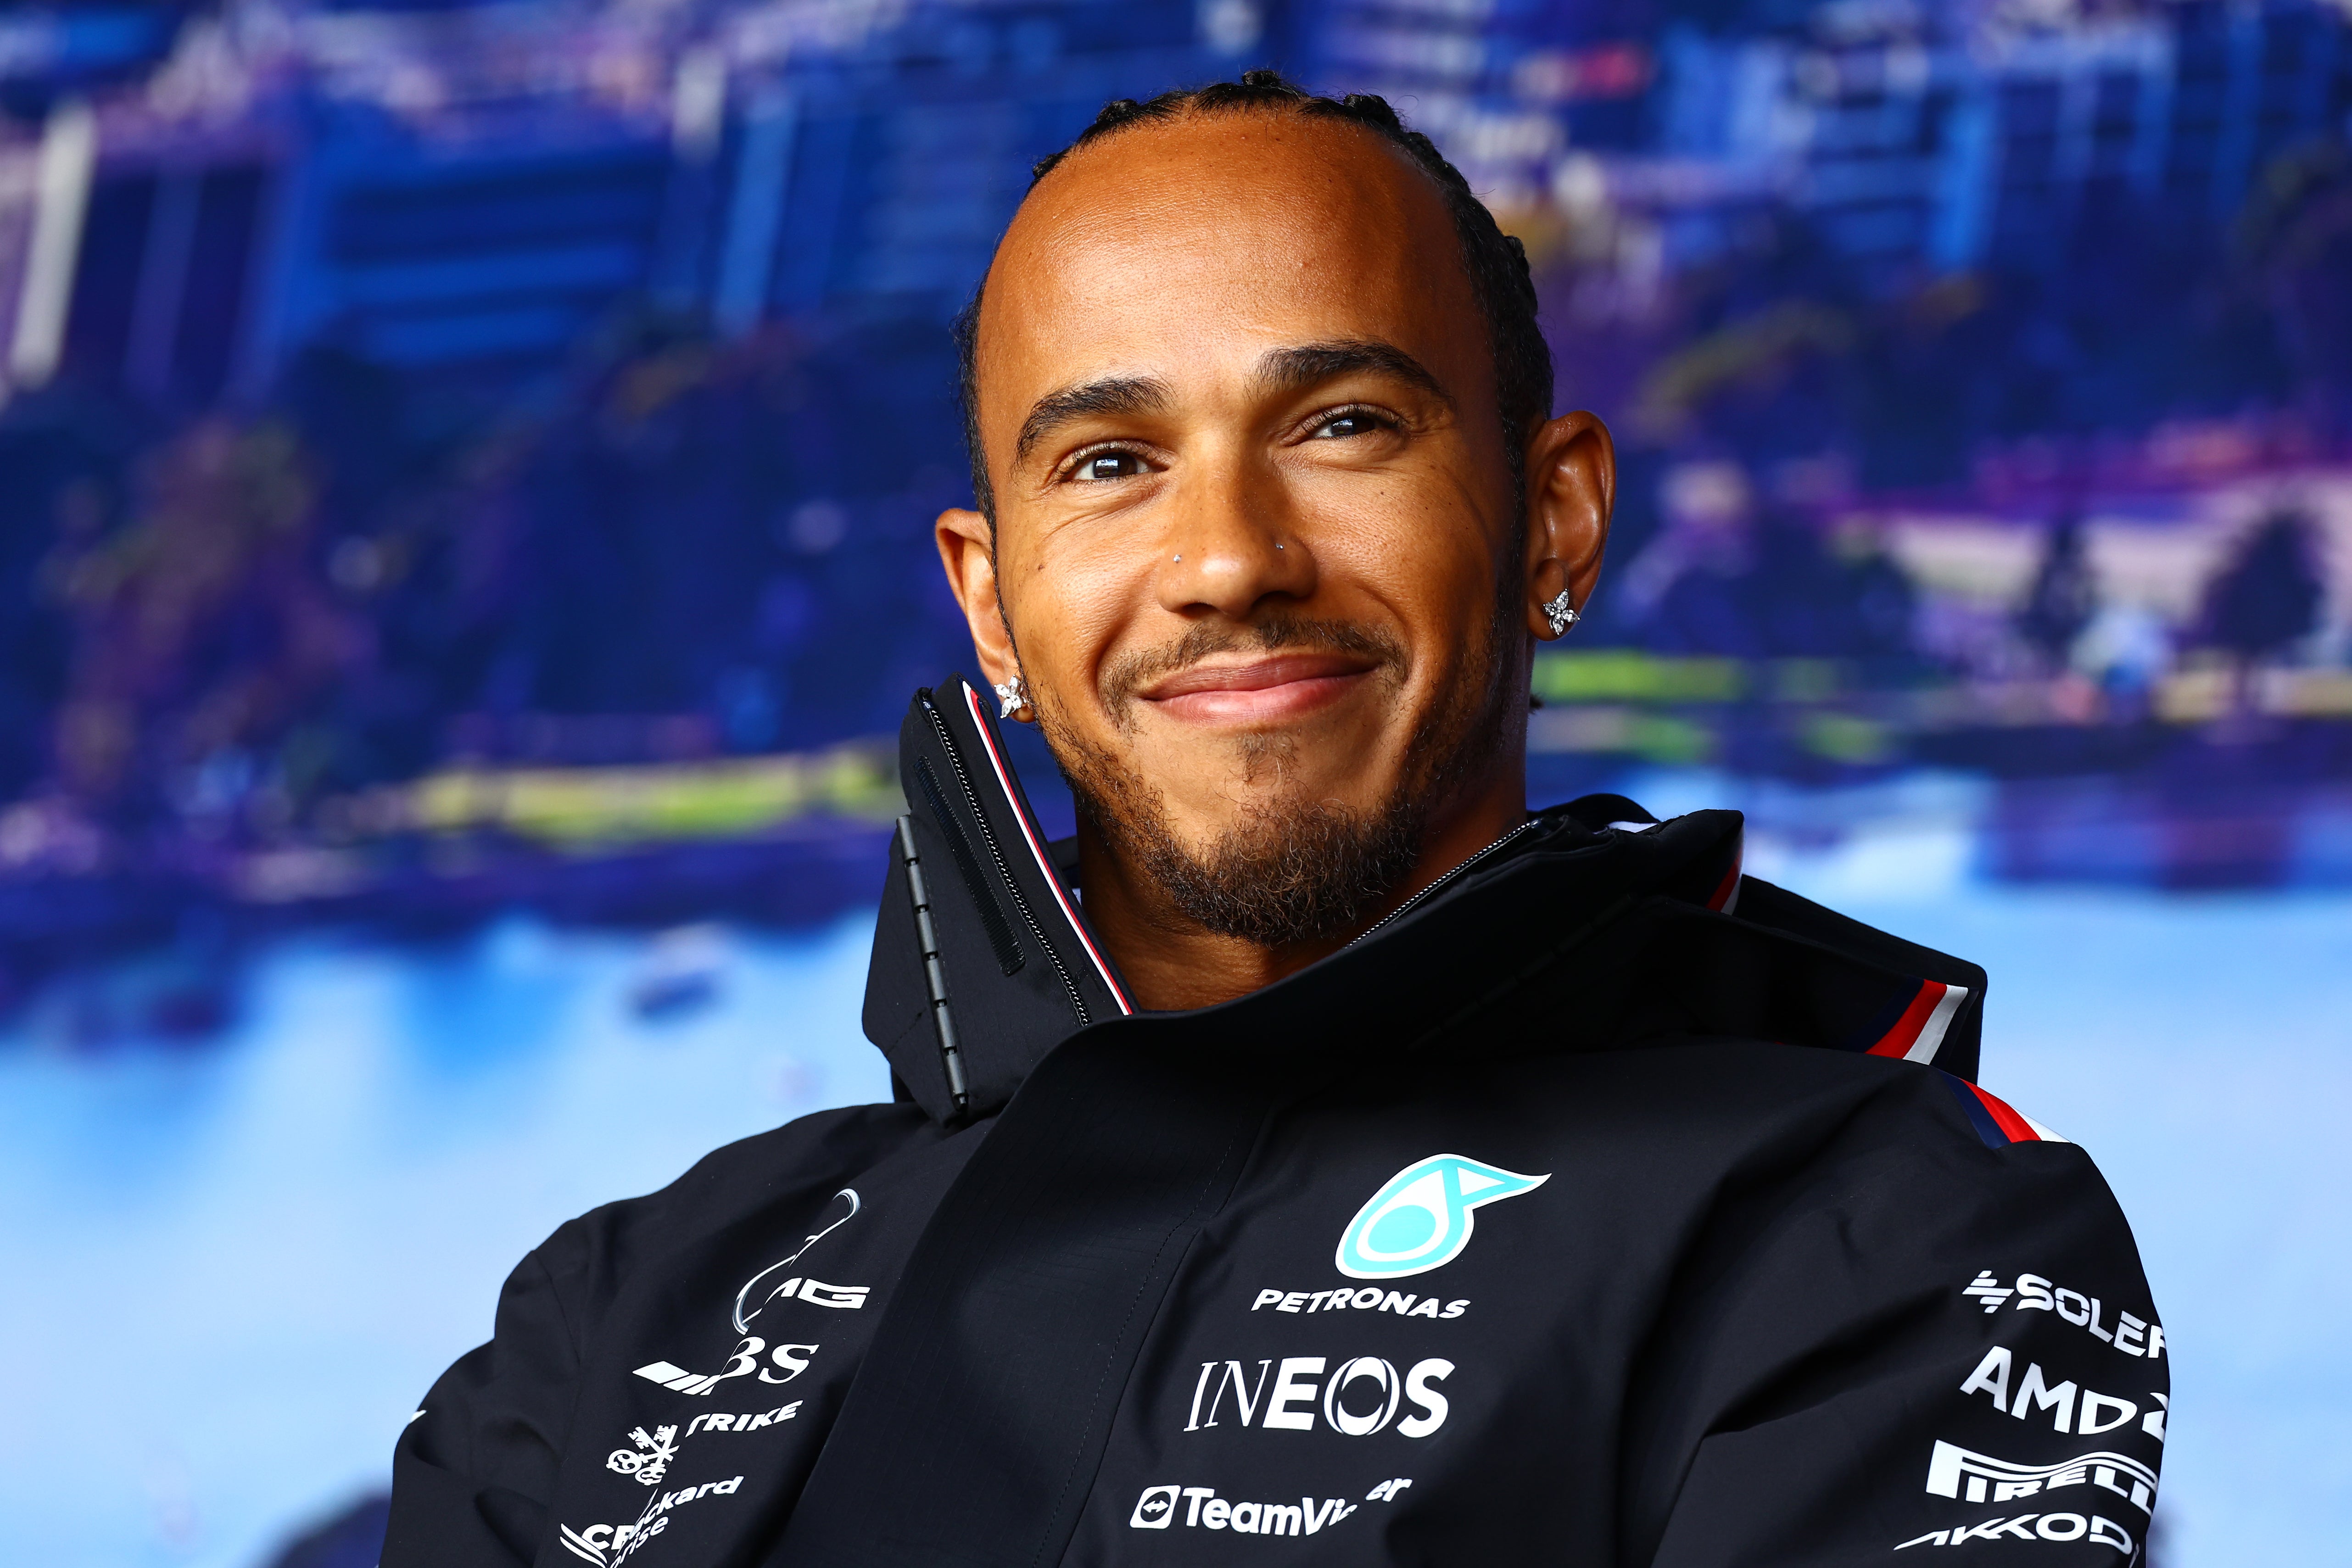 Hamilton will race in F1 beyond his 40th birthday